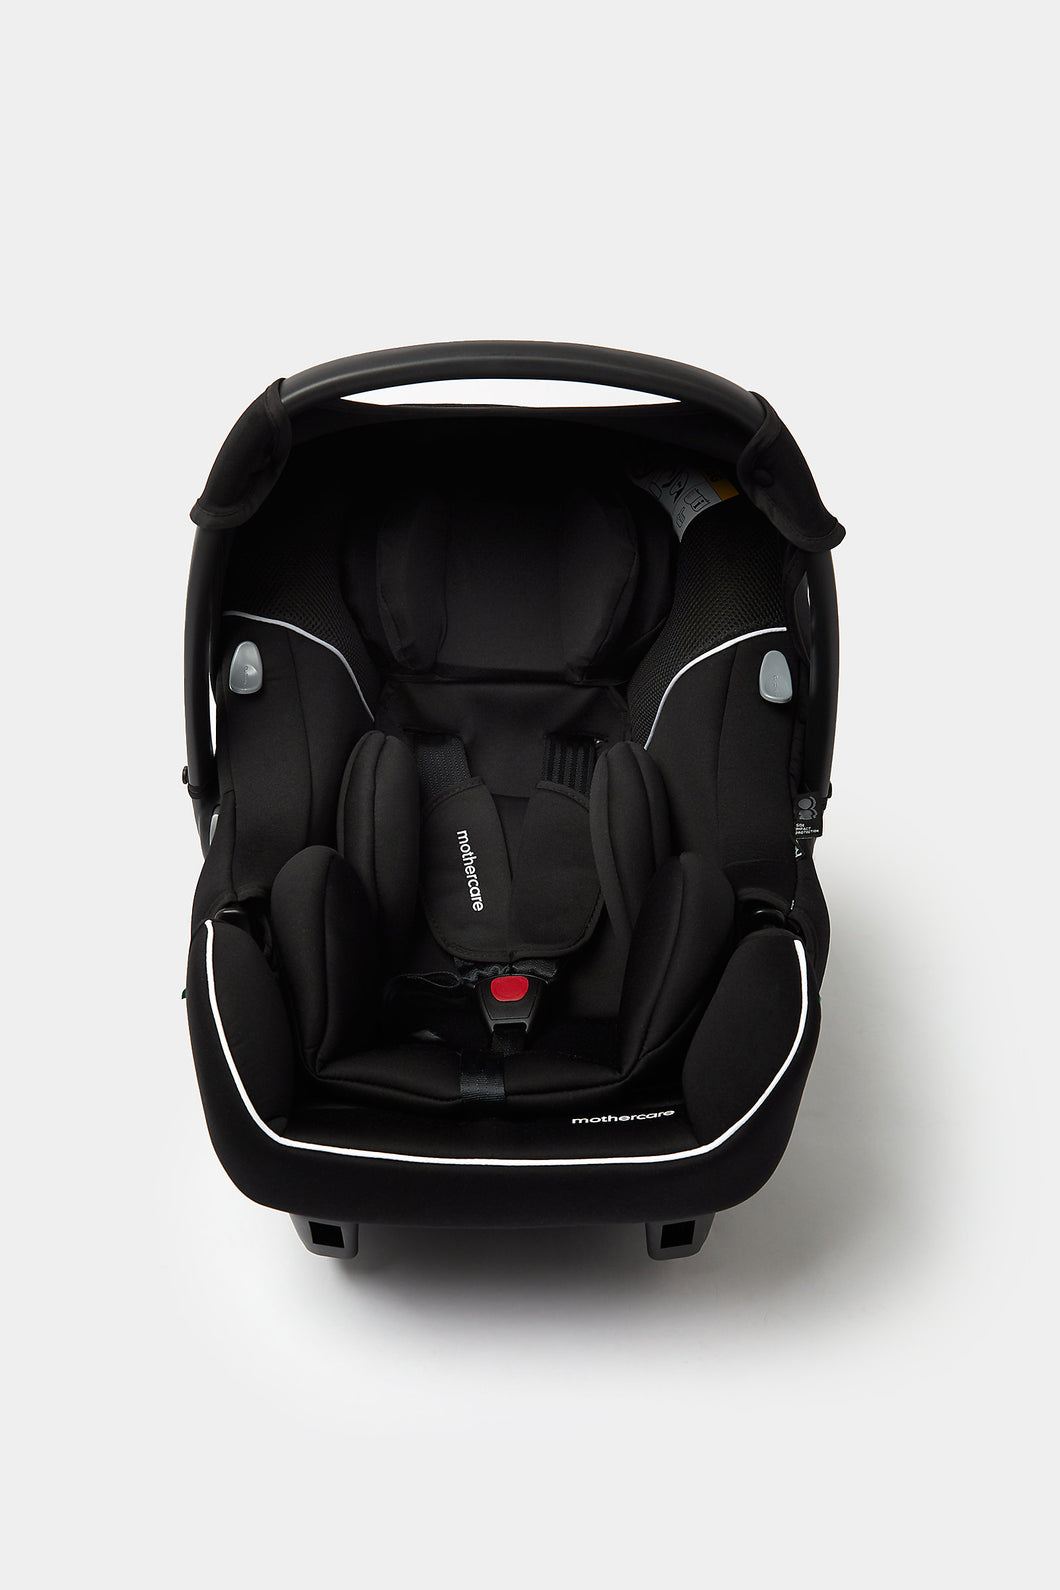 Mothercare Arica R129 Infant Carrier Car Seat